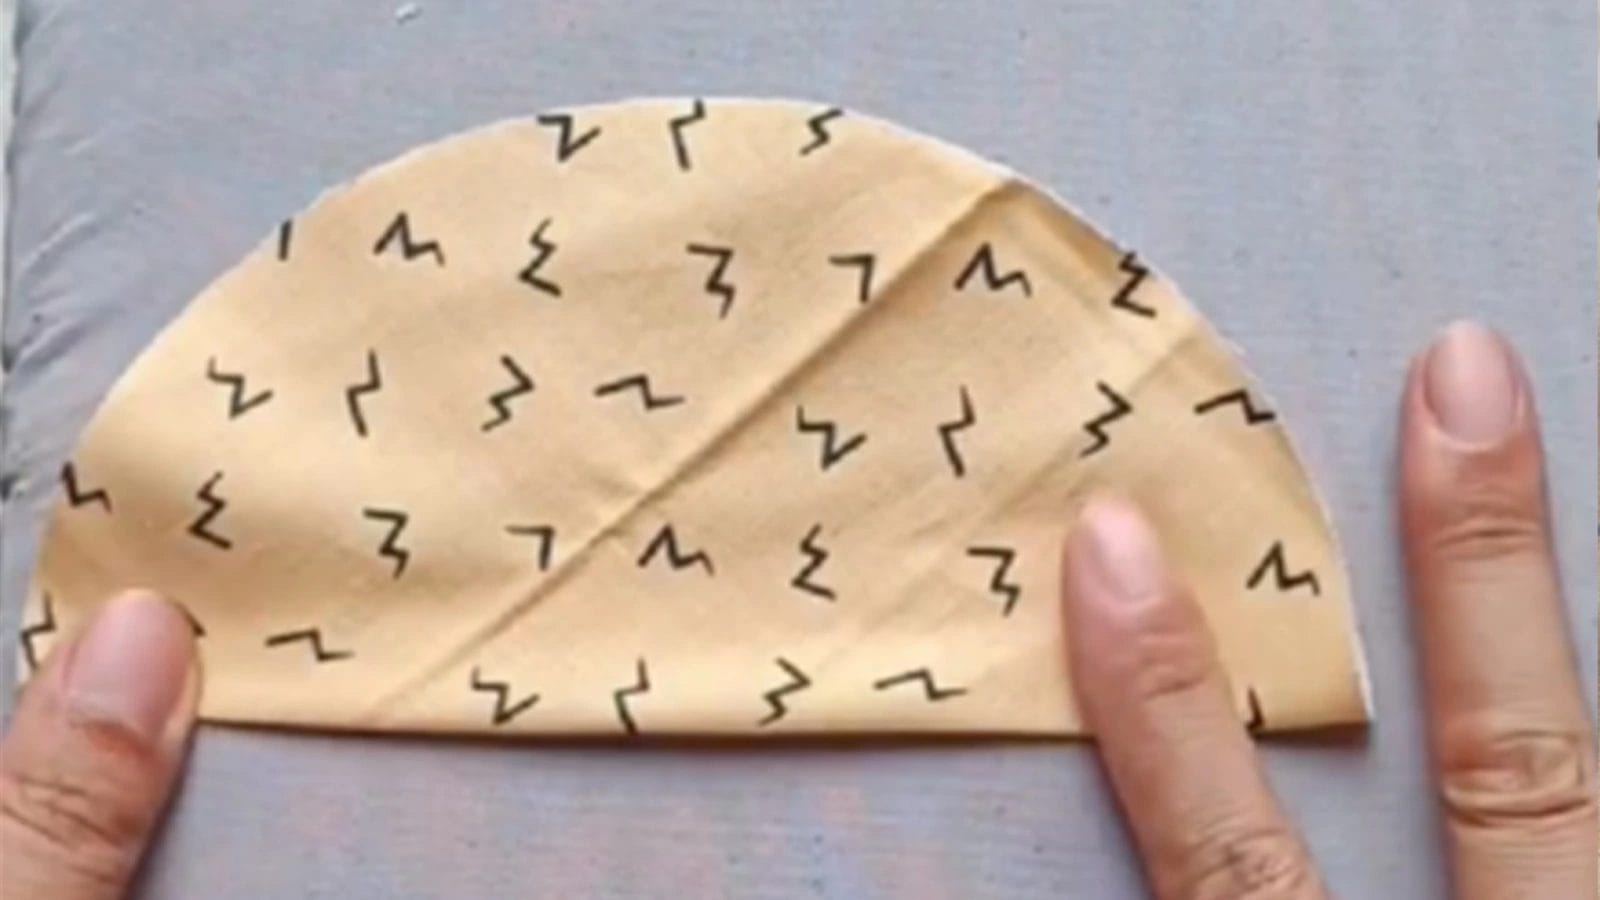 take out 2 pieces of round fabric and fold them in half, then iron them flat